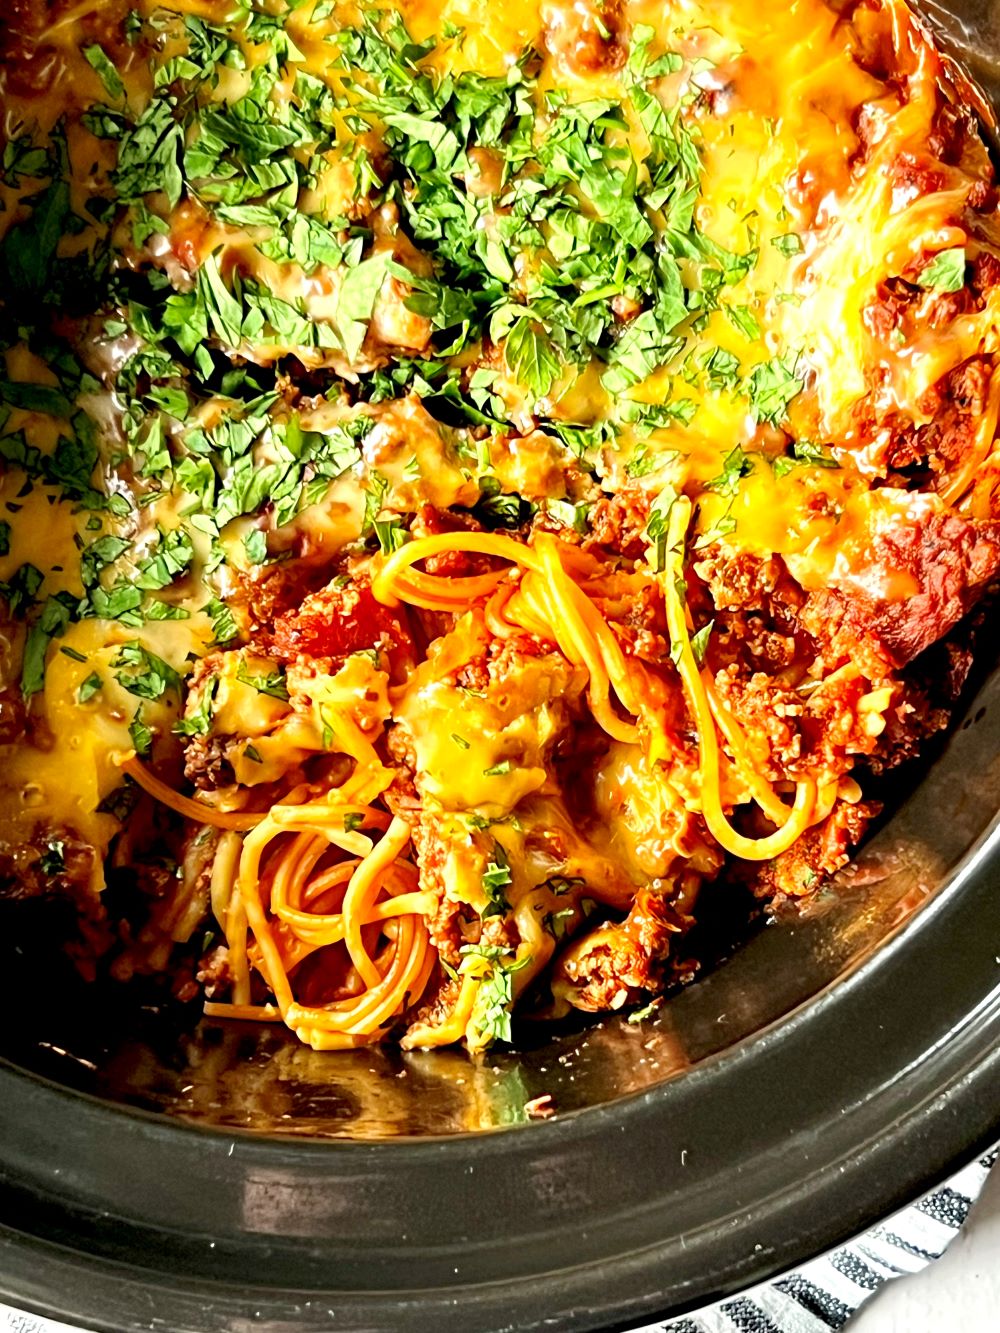 Showing noodles and meat sauce cooked in slow cooker